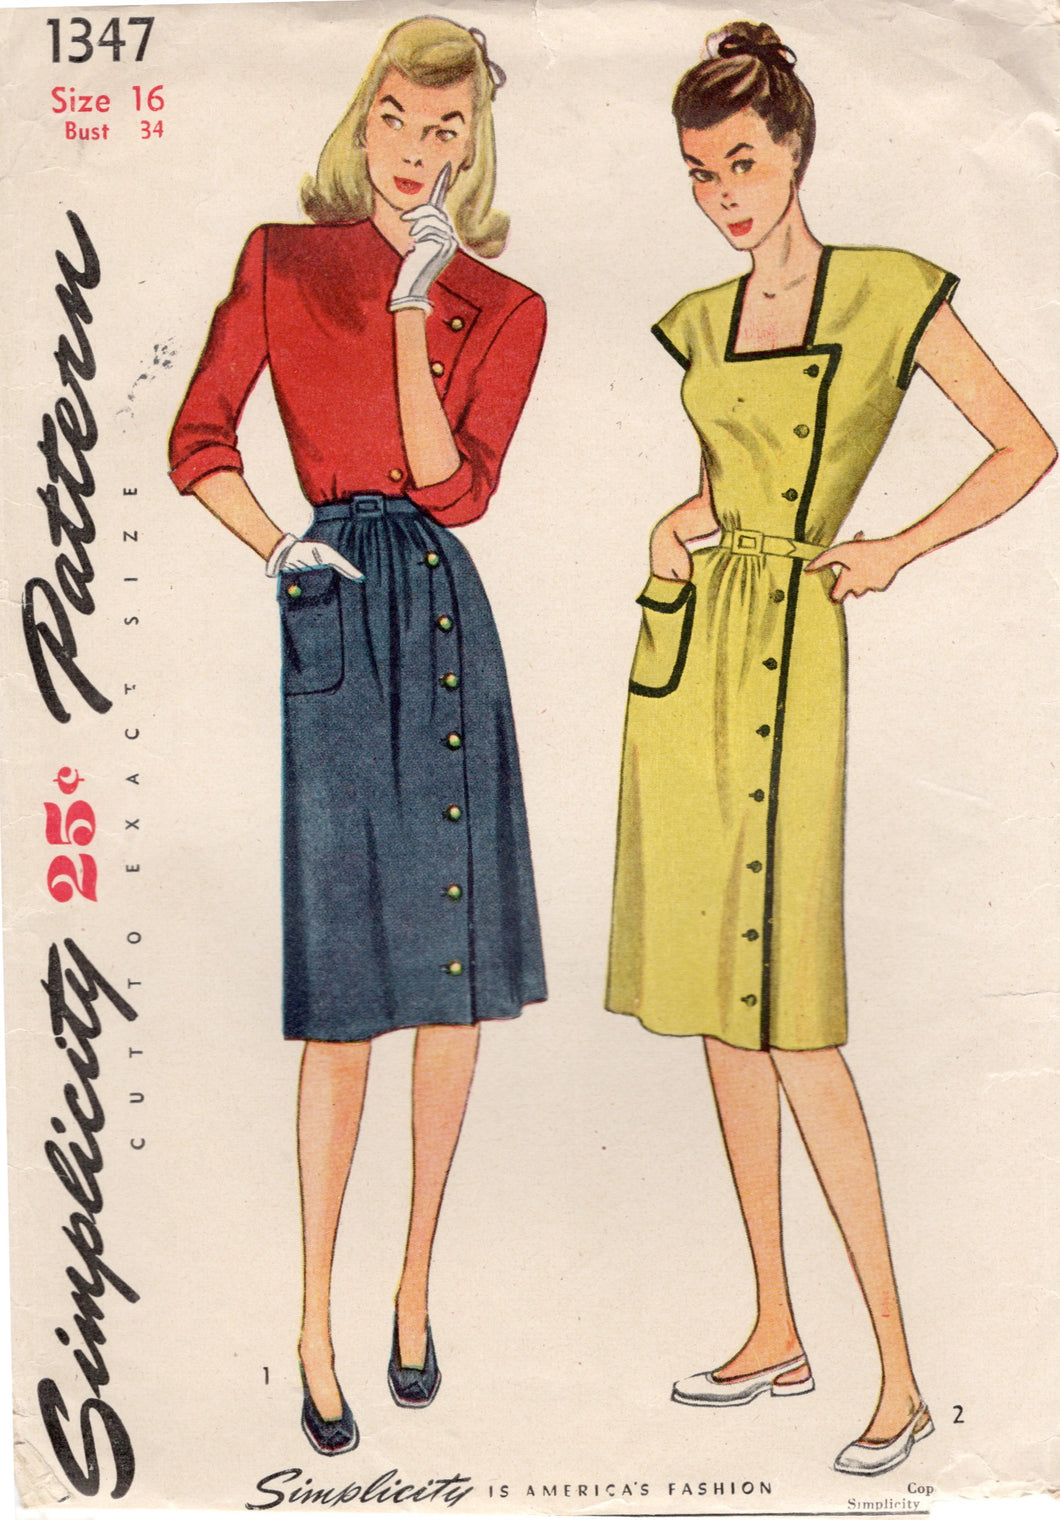 1940's Simplicity Dress with Crossover Button Closure with Two Necklines - Bust 34